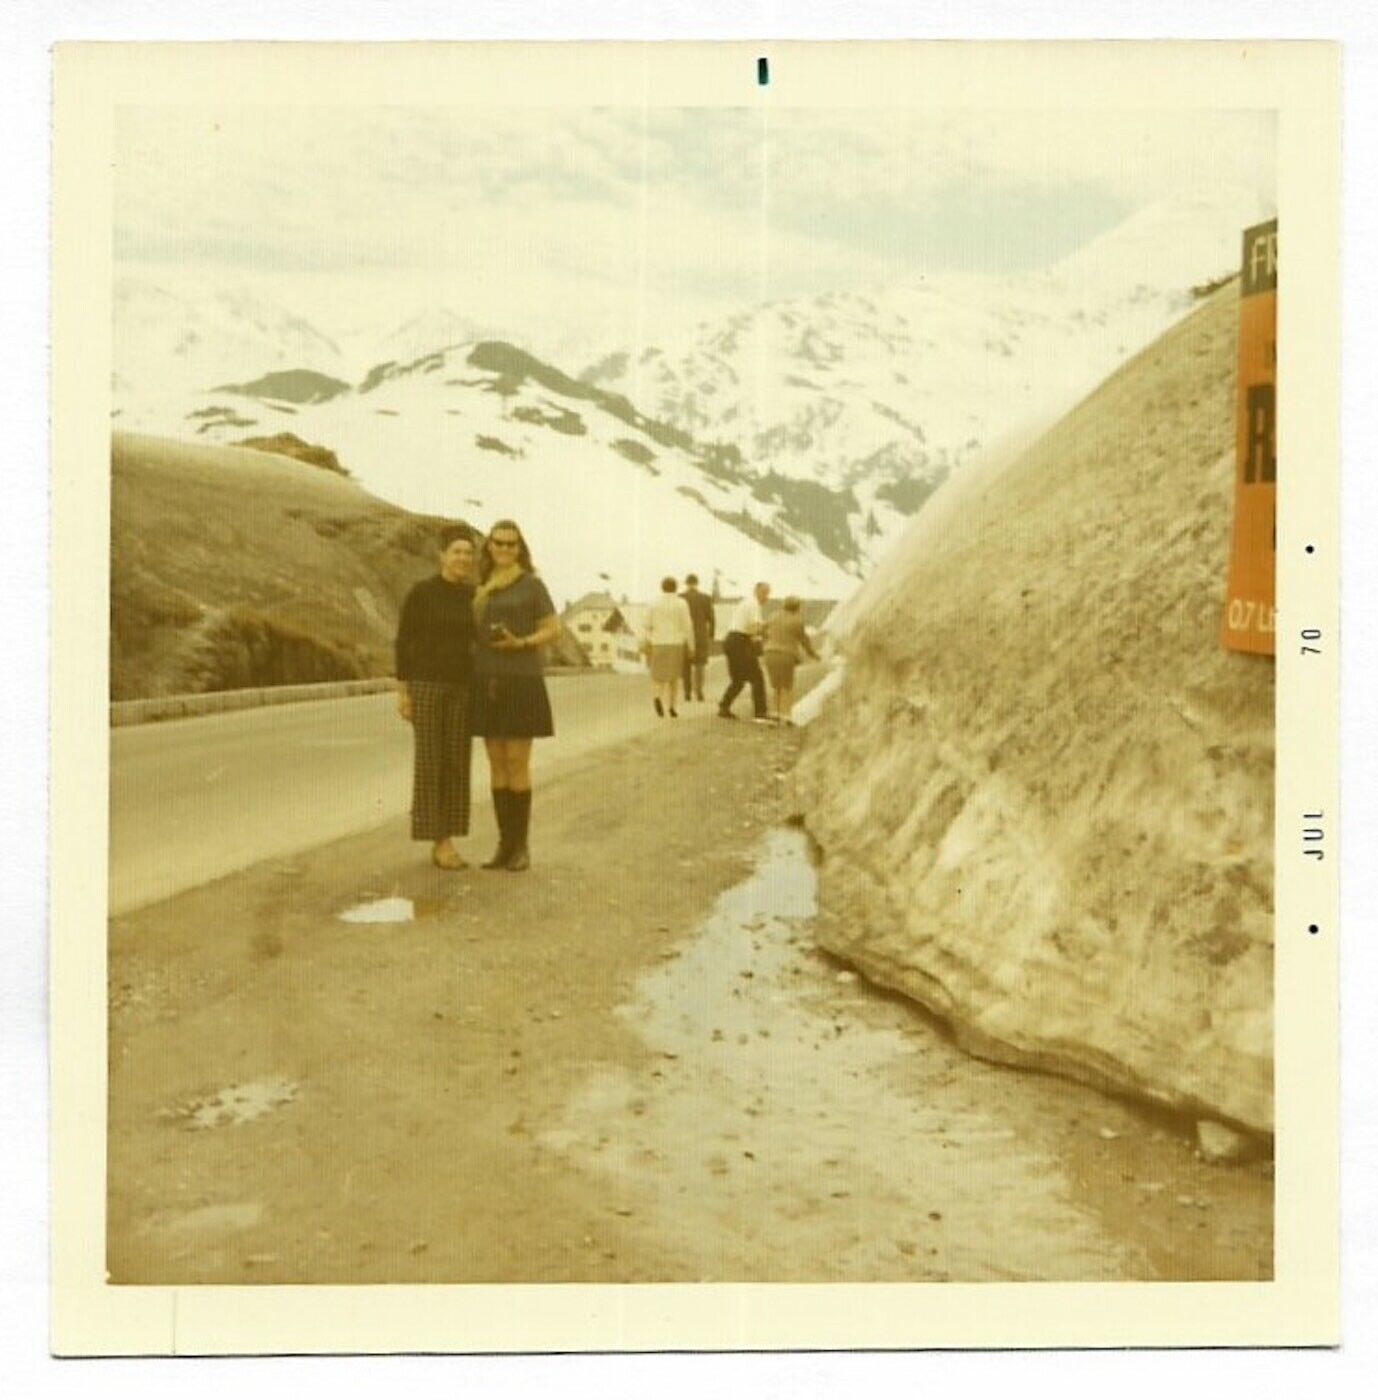 Square Vintage 70s PHOTO Pair Women & People on Snowy Mountain Road Trip